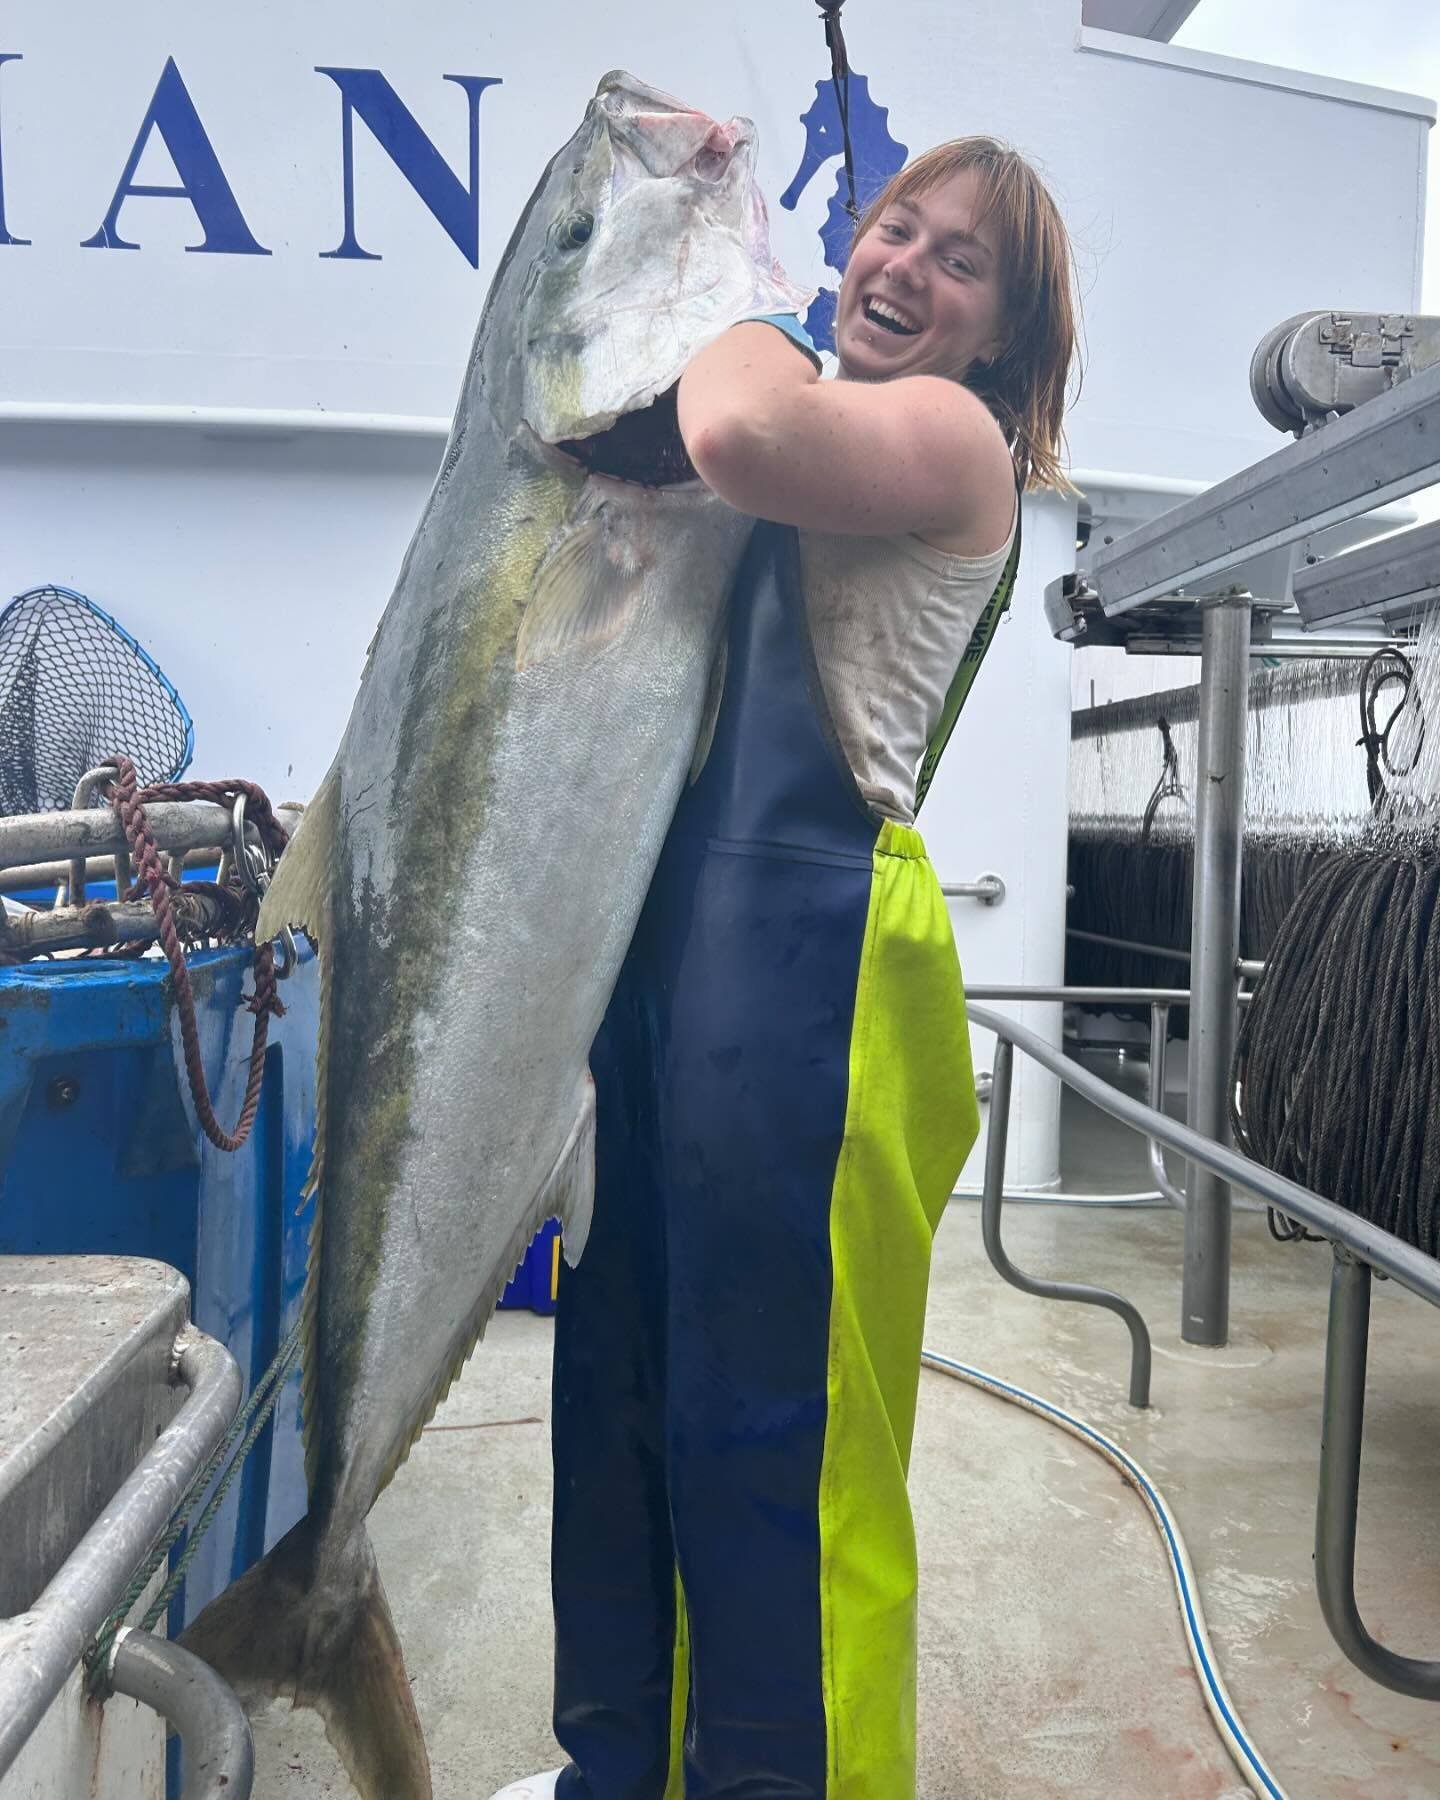 We&rsquo;ve got superstar staff in all corners of the business, like the enthusiastic Eve Massie who is one of our fantastic deckhands onboard our fishing vessel Diana!
.
Eve comes from a Tasmanian fishing family and has been a part of our team for n